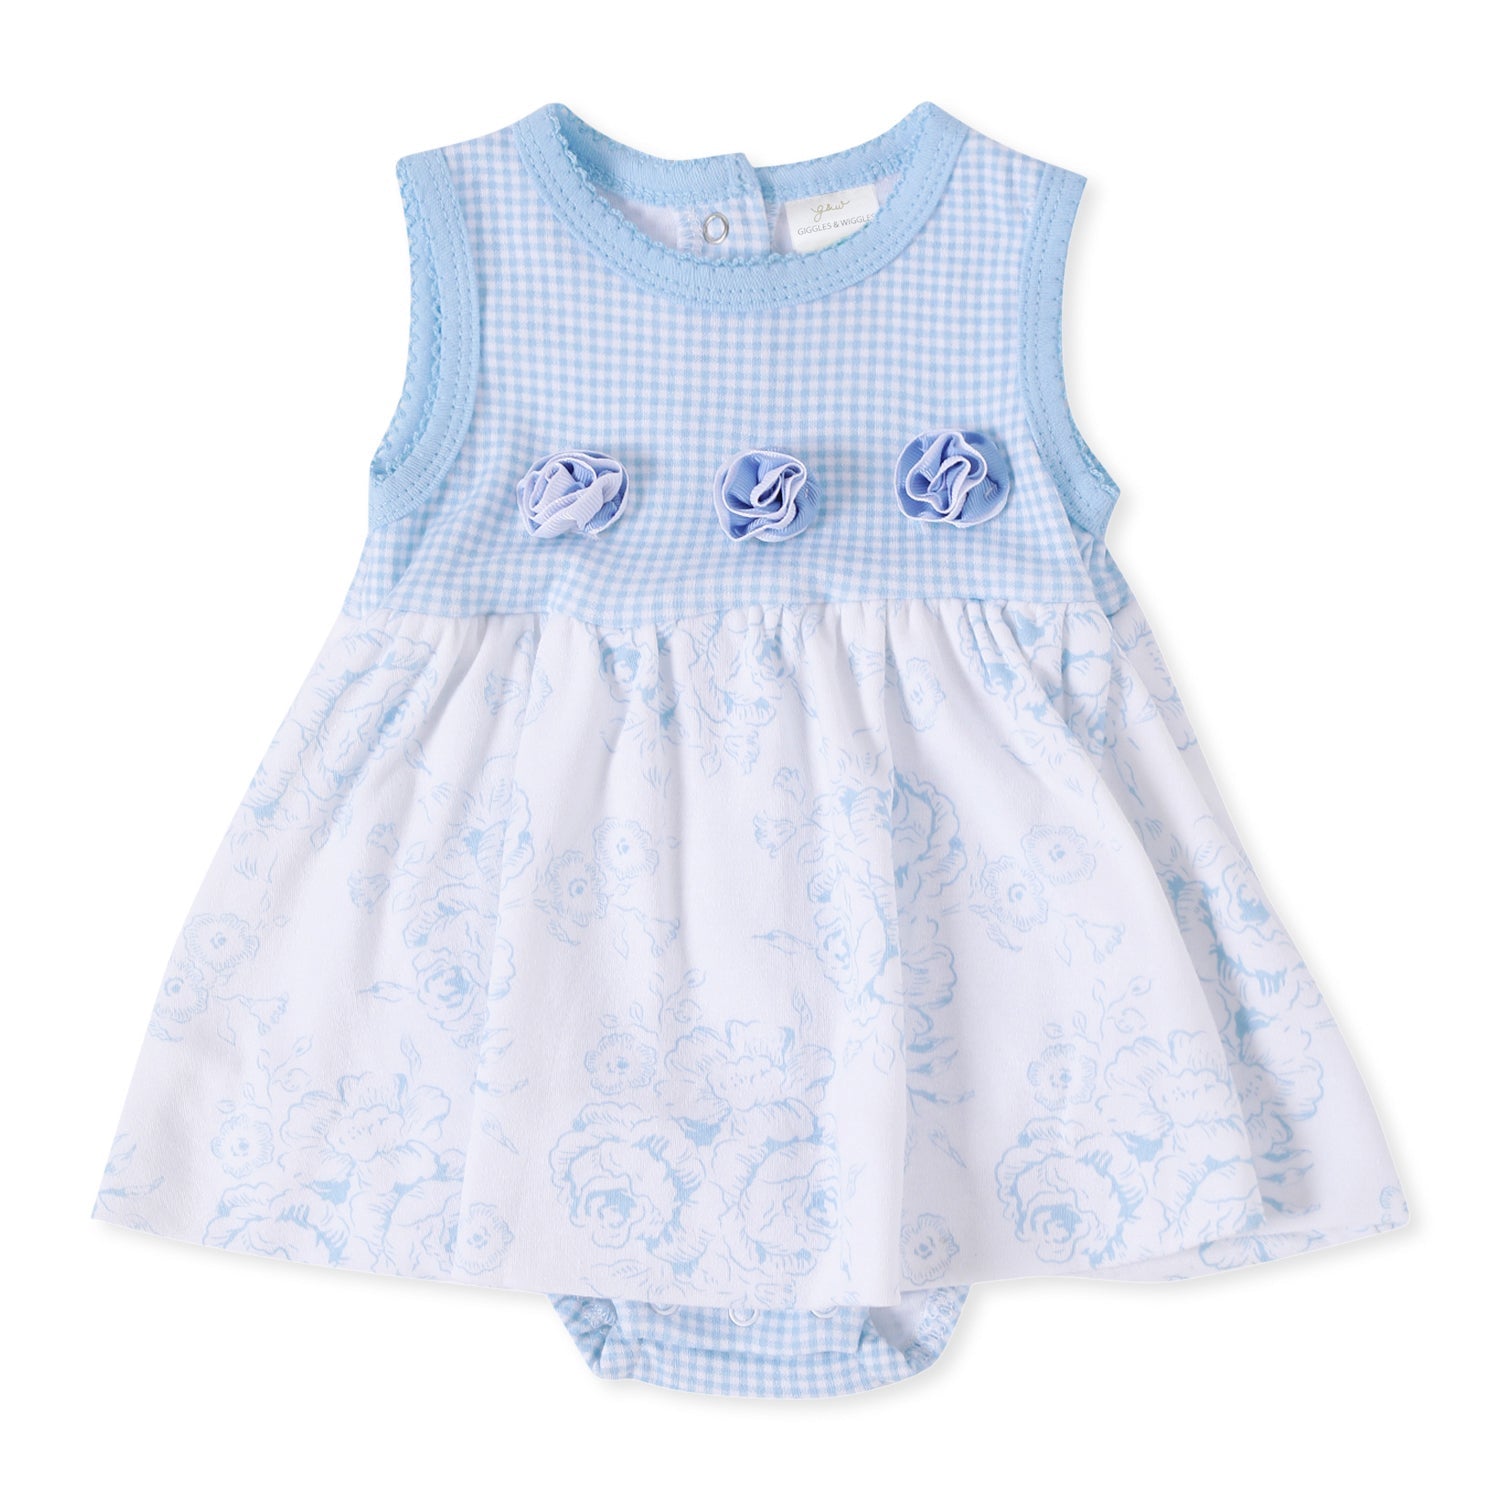 Giggles & Wiggles Let's Twirl Powder Blue Floral Dress With Accessories